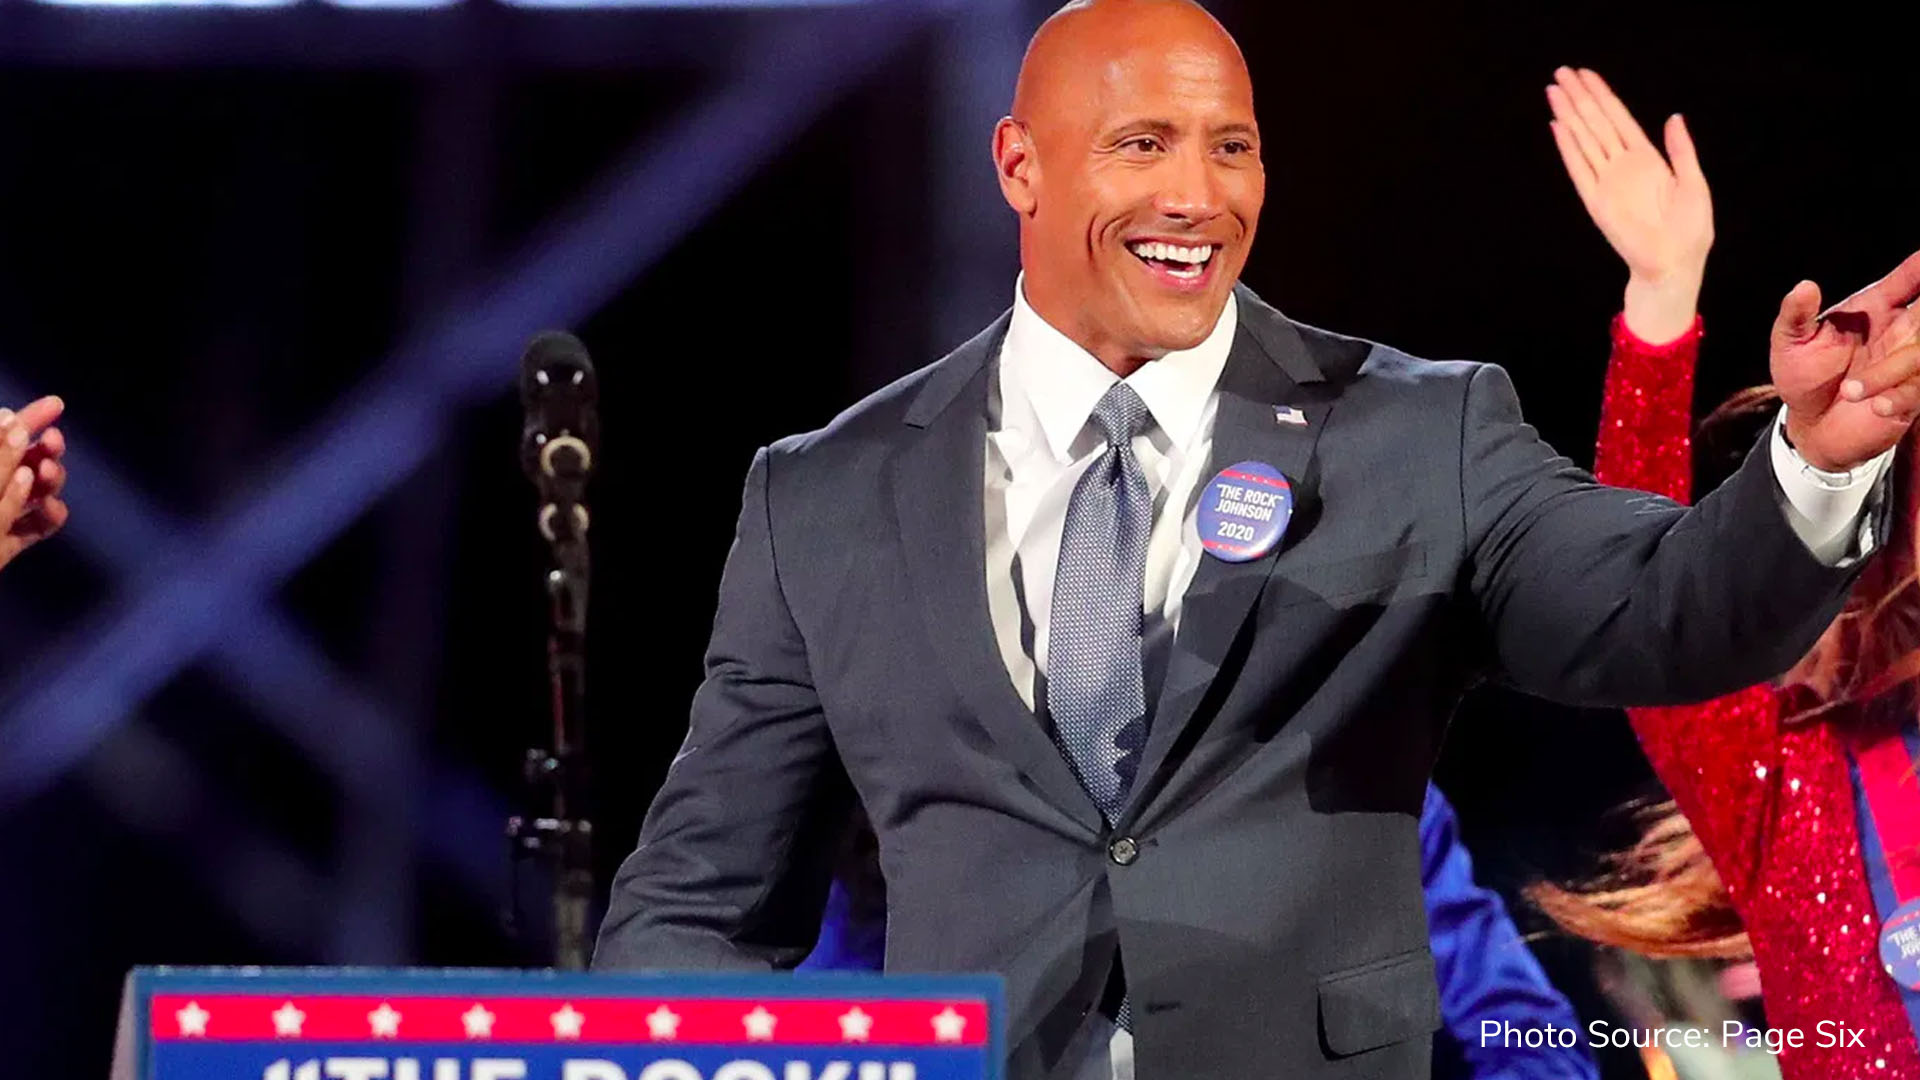 Nearly Half of Americans want Dwayne ‘The Rock’ Johnson as President